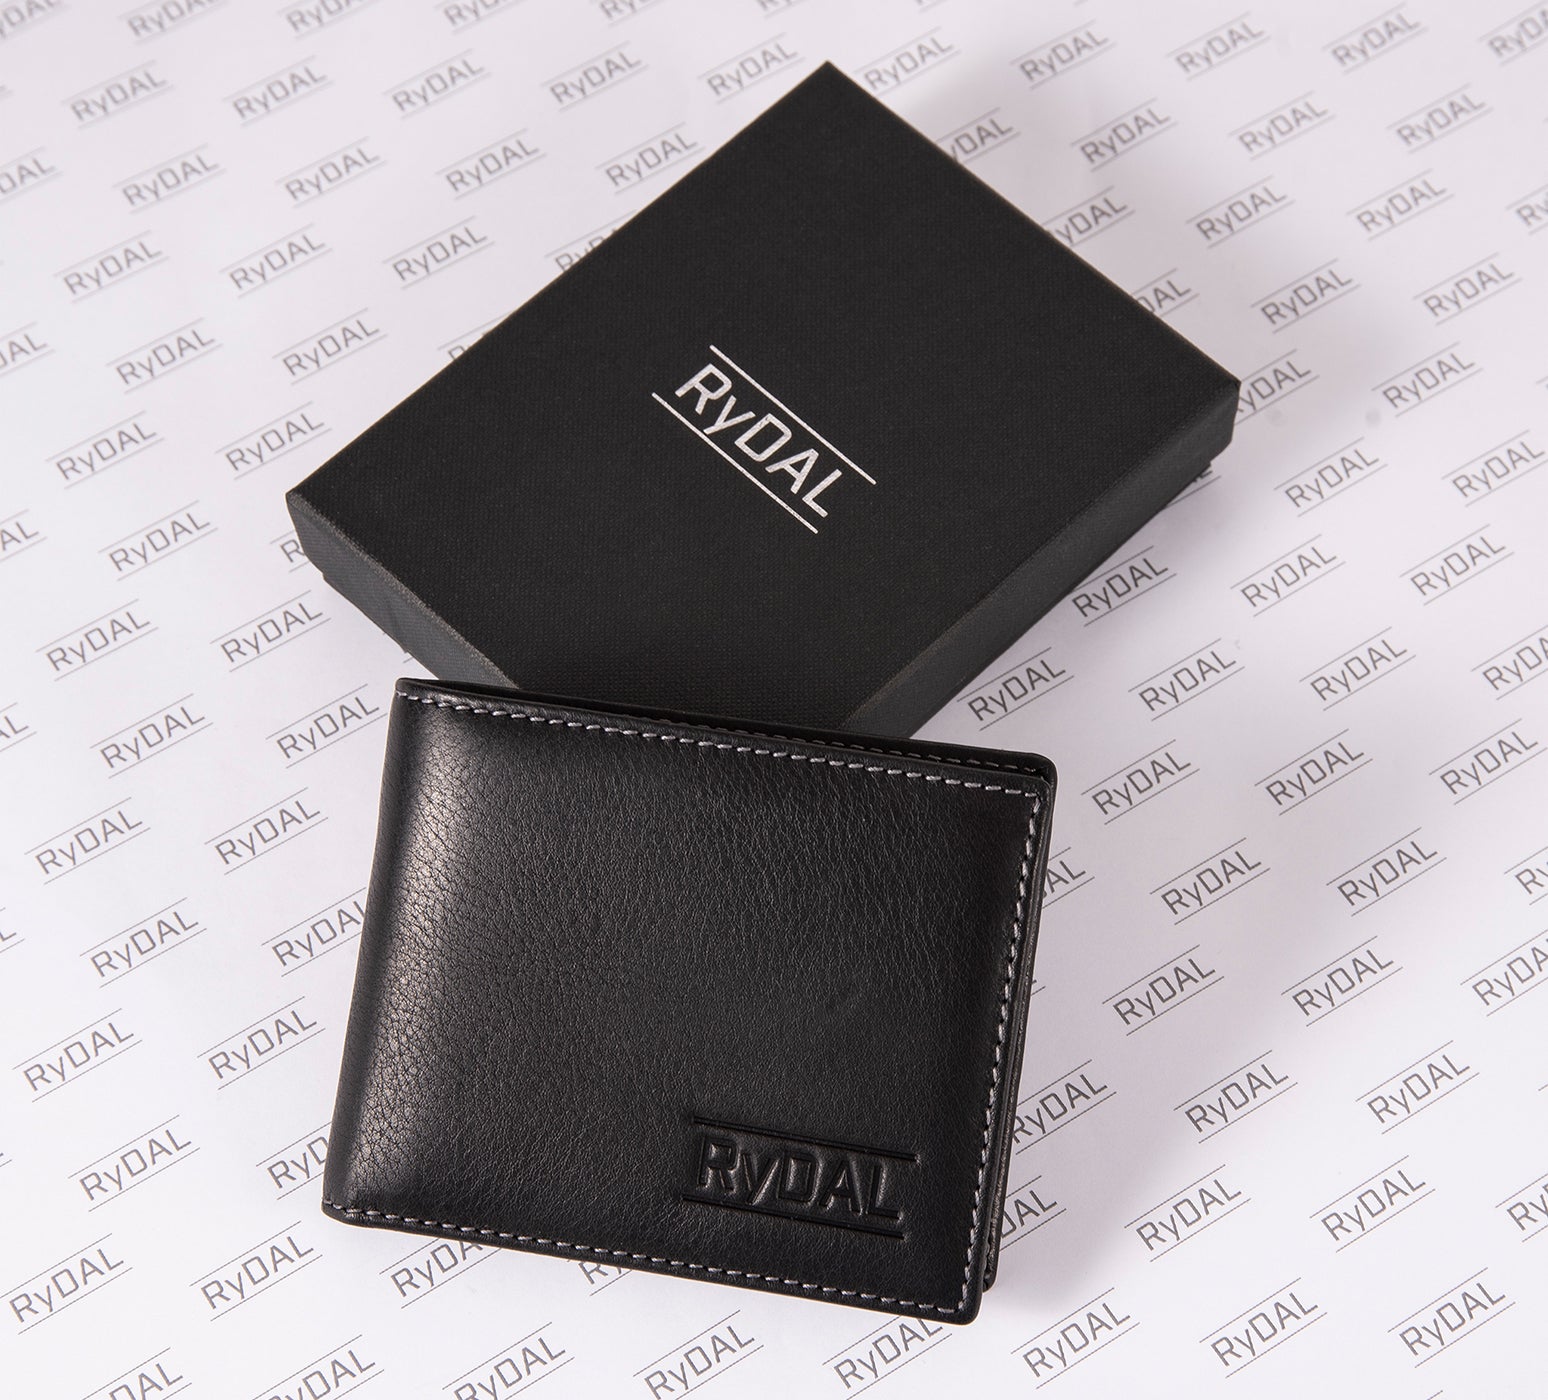 Mens Leather Wallet with Coin Pocket from Rydal in 'Black/Grey' with Giftbox.